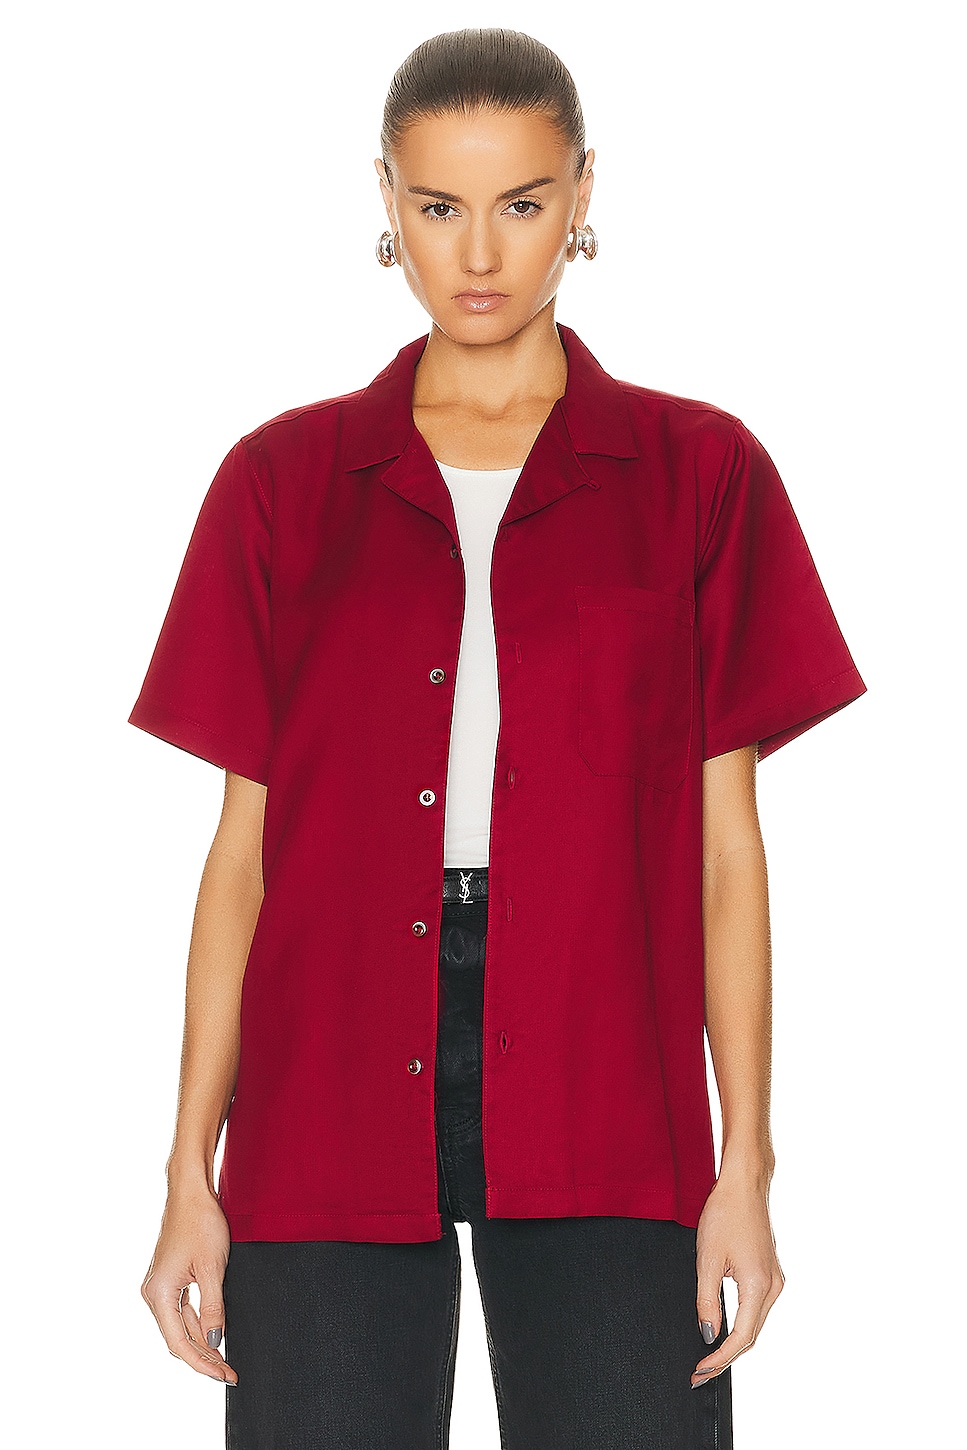 Image 1 of WAO The Camp Shirt in burgundy